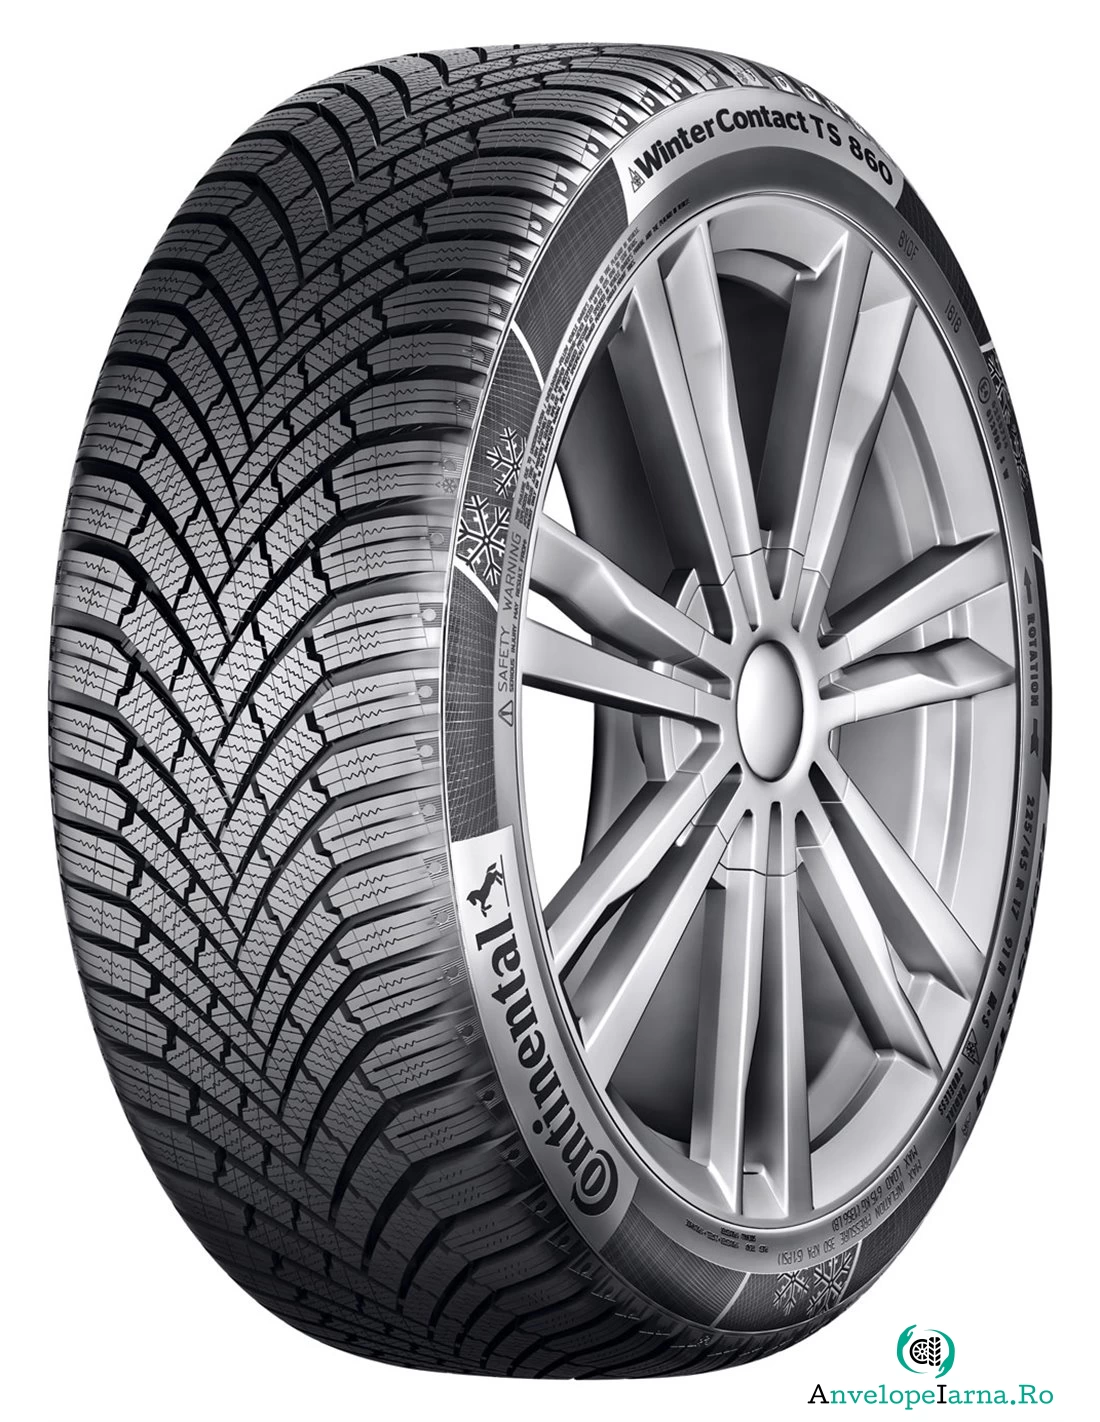 CONTINENTAL WINTCONTACT TS 860 215/65 R15 96H